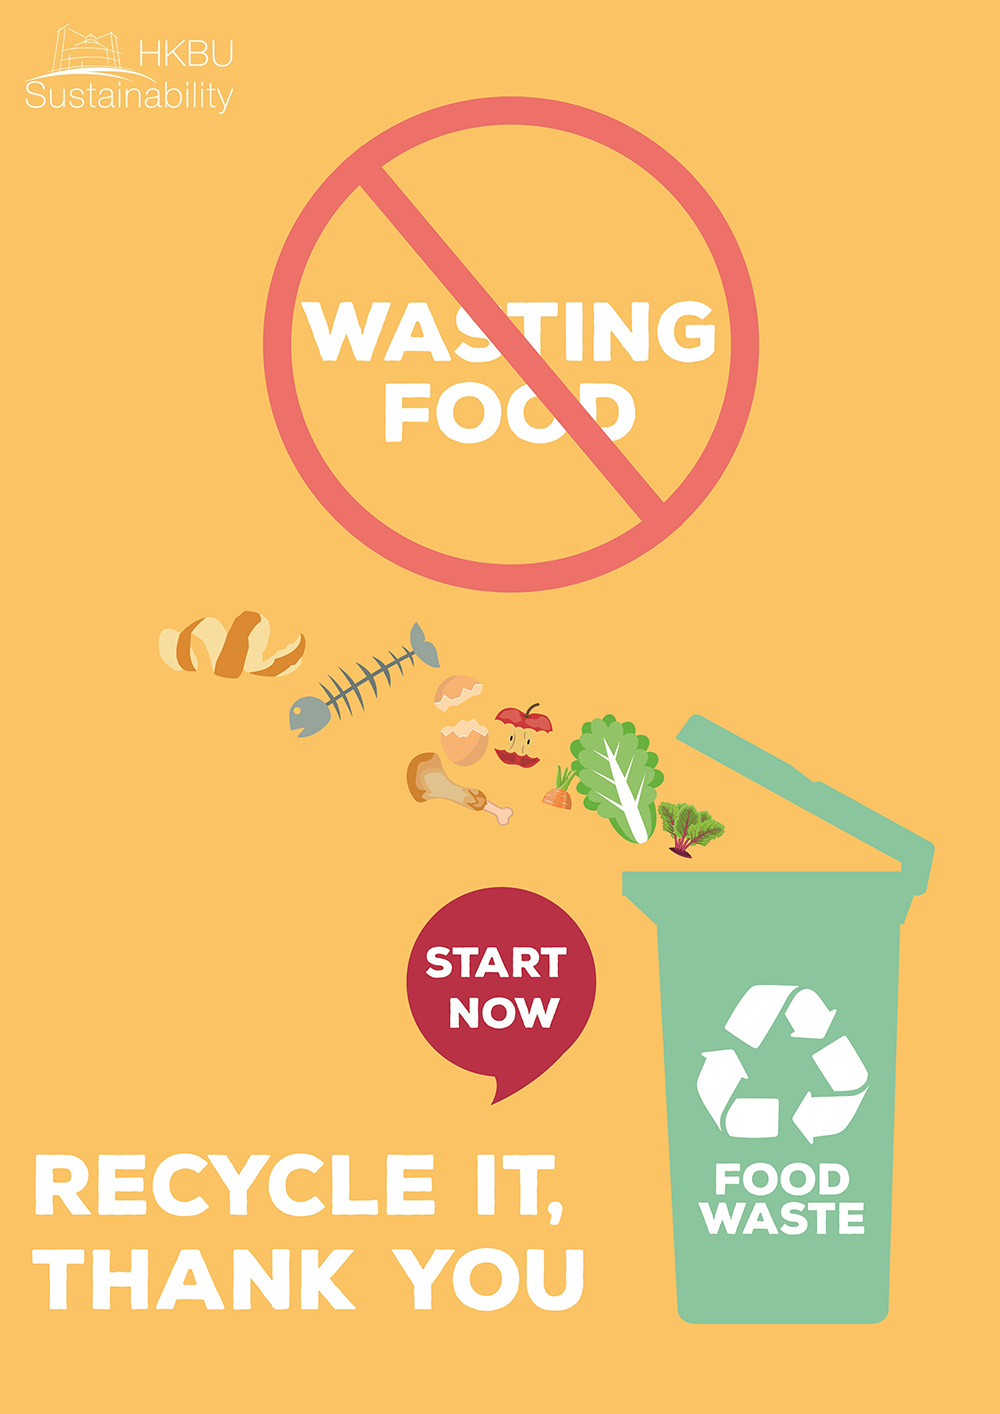 Separate and Recycle Food Waste